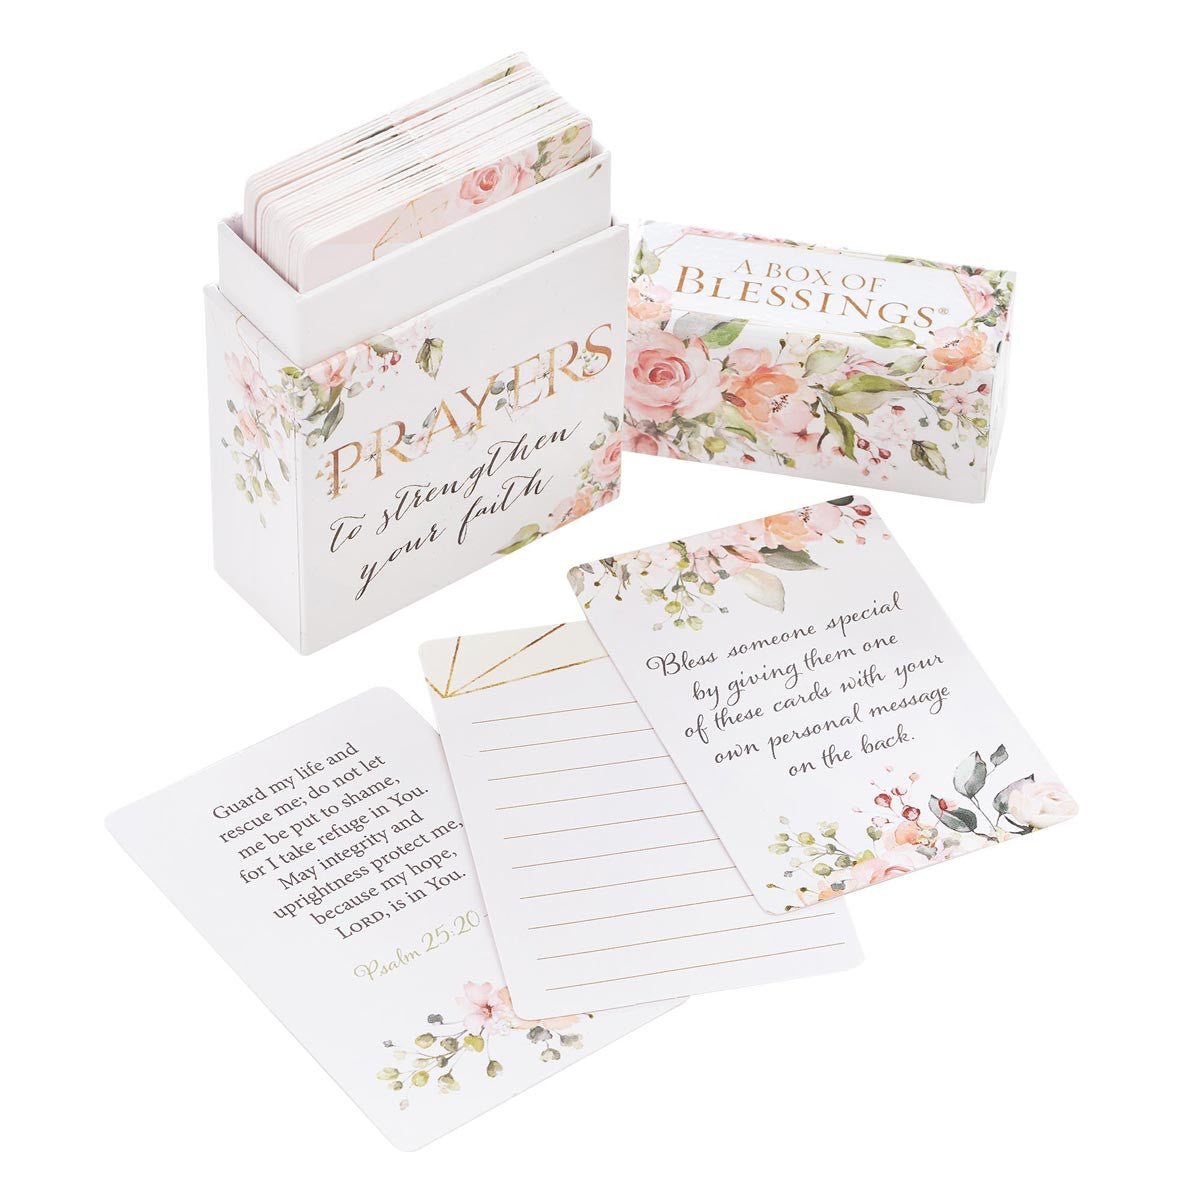 Prayers to Strengthen Your Faith | Box of Blessings